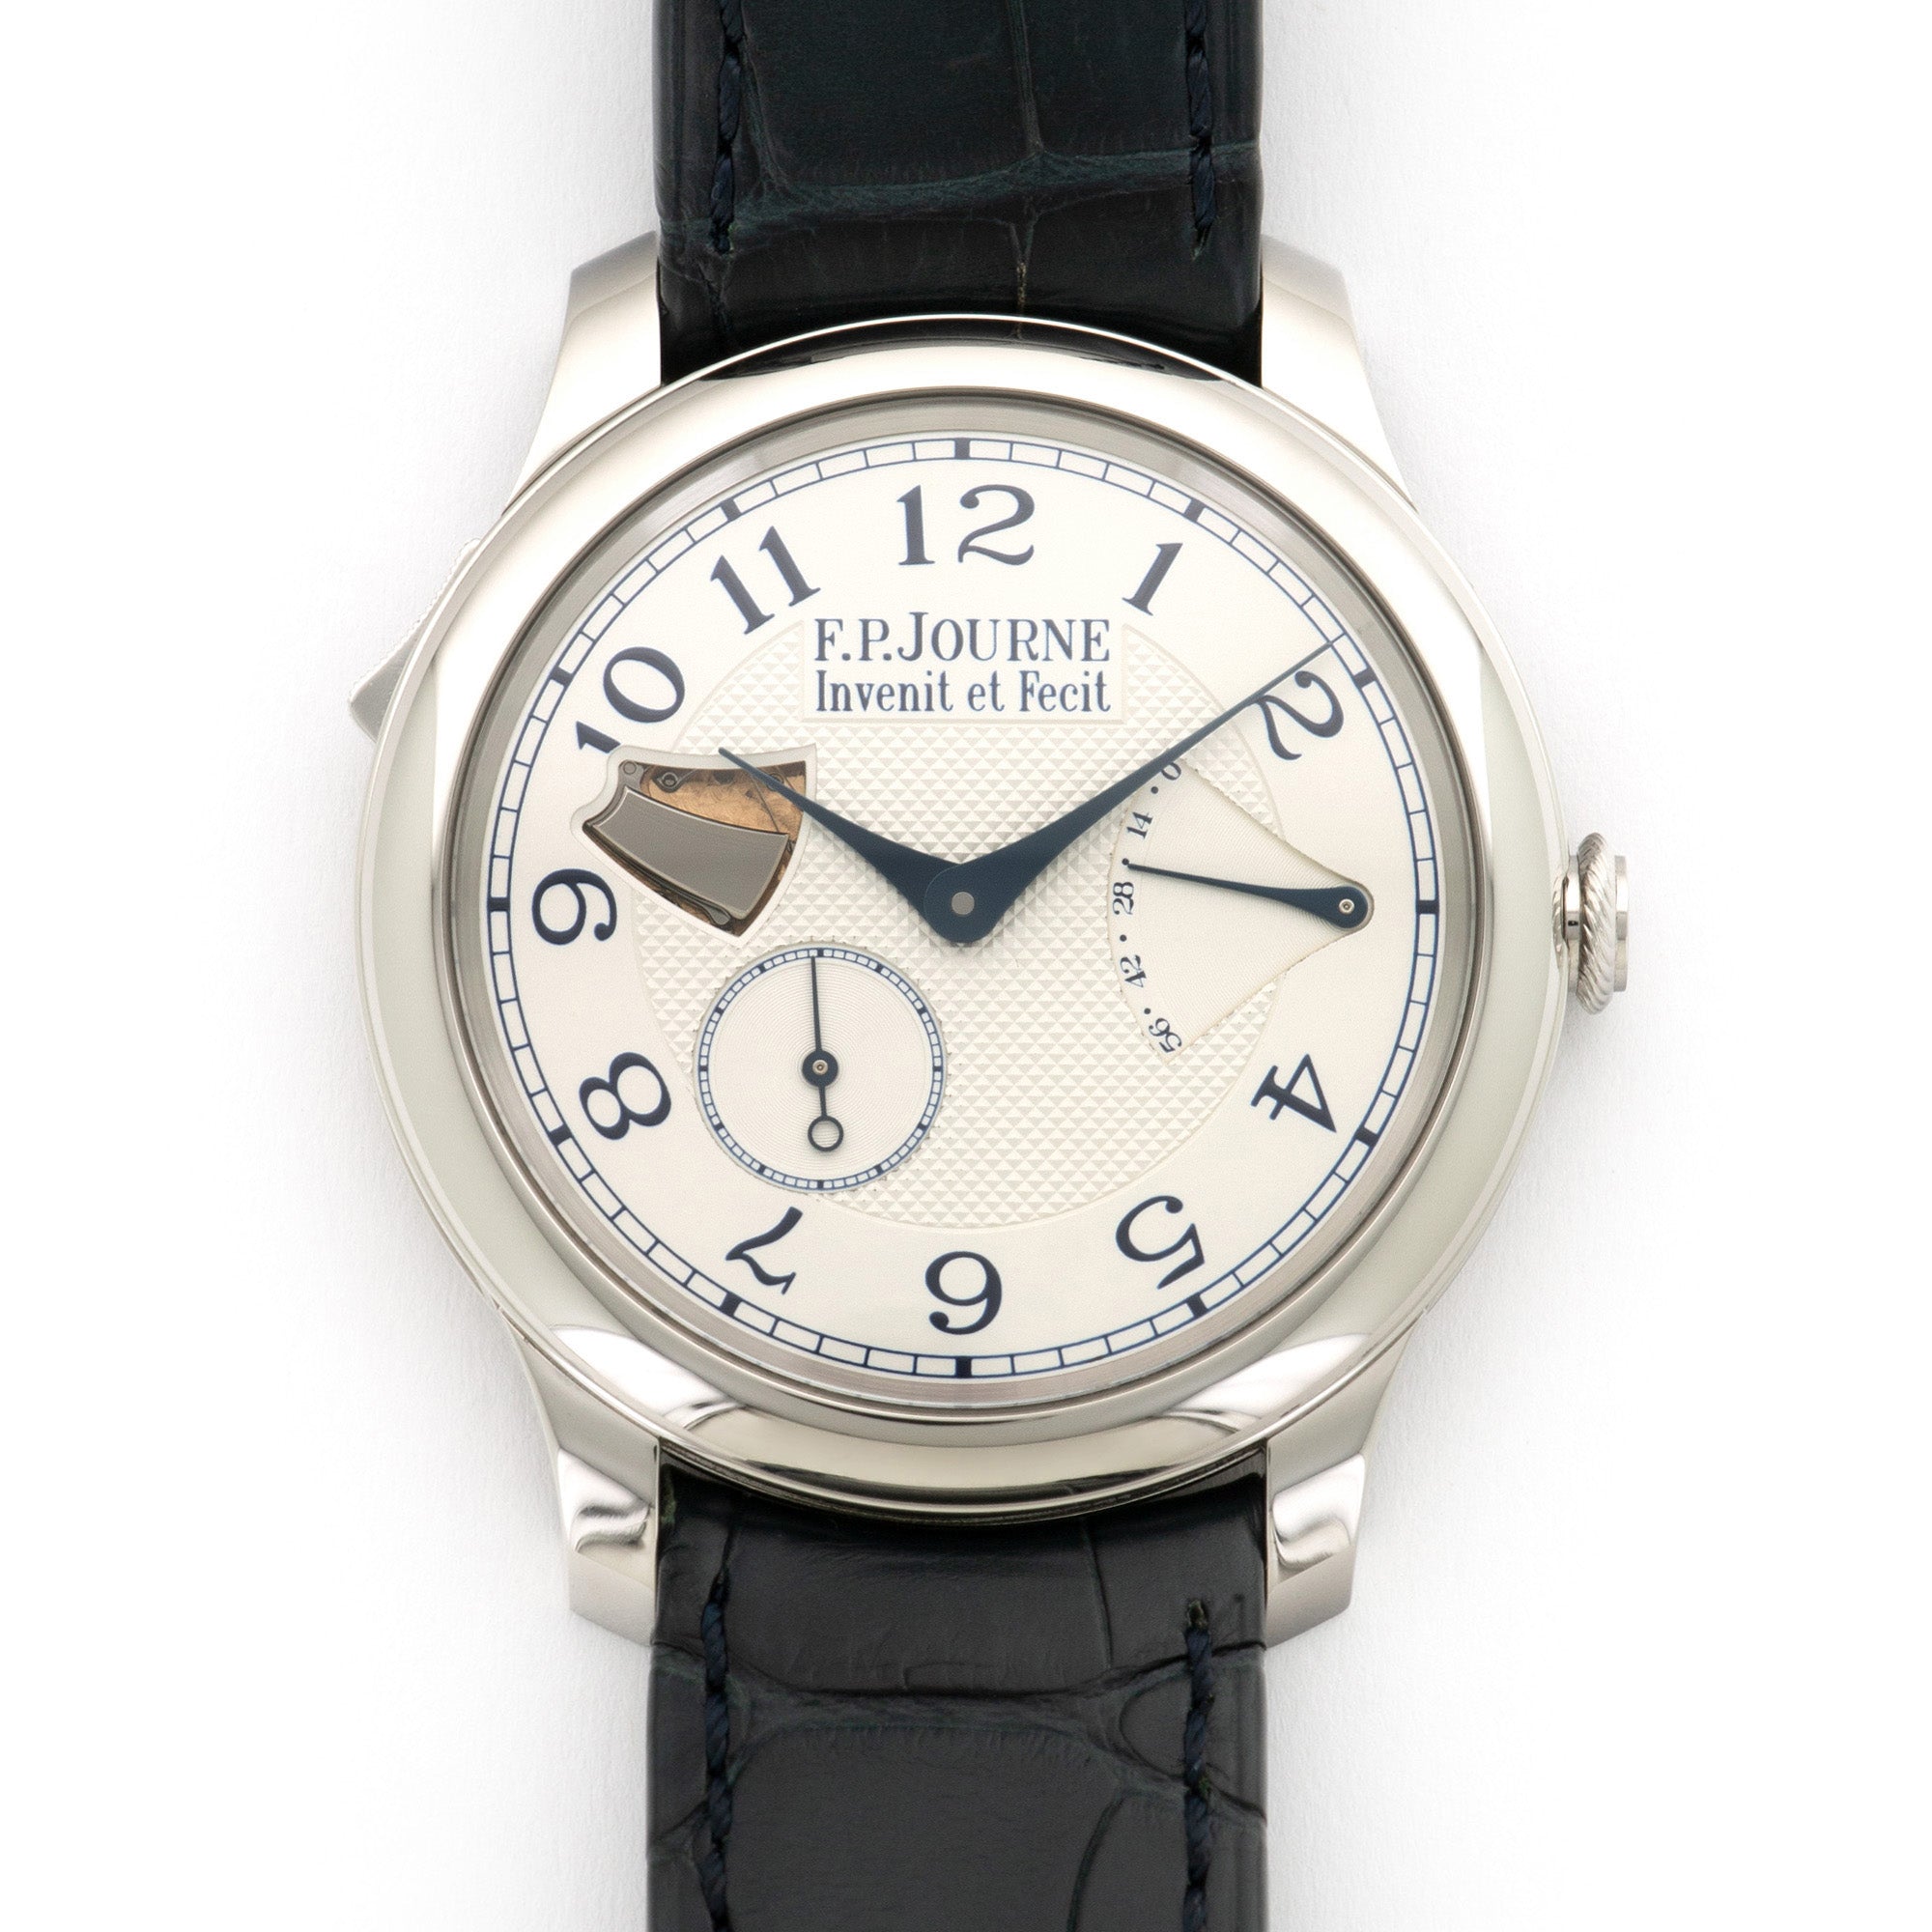 FP Journe - F.P. Journe Repetition Souveraine Minute Repeater Watch - The Keystone Watches